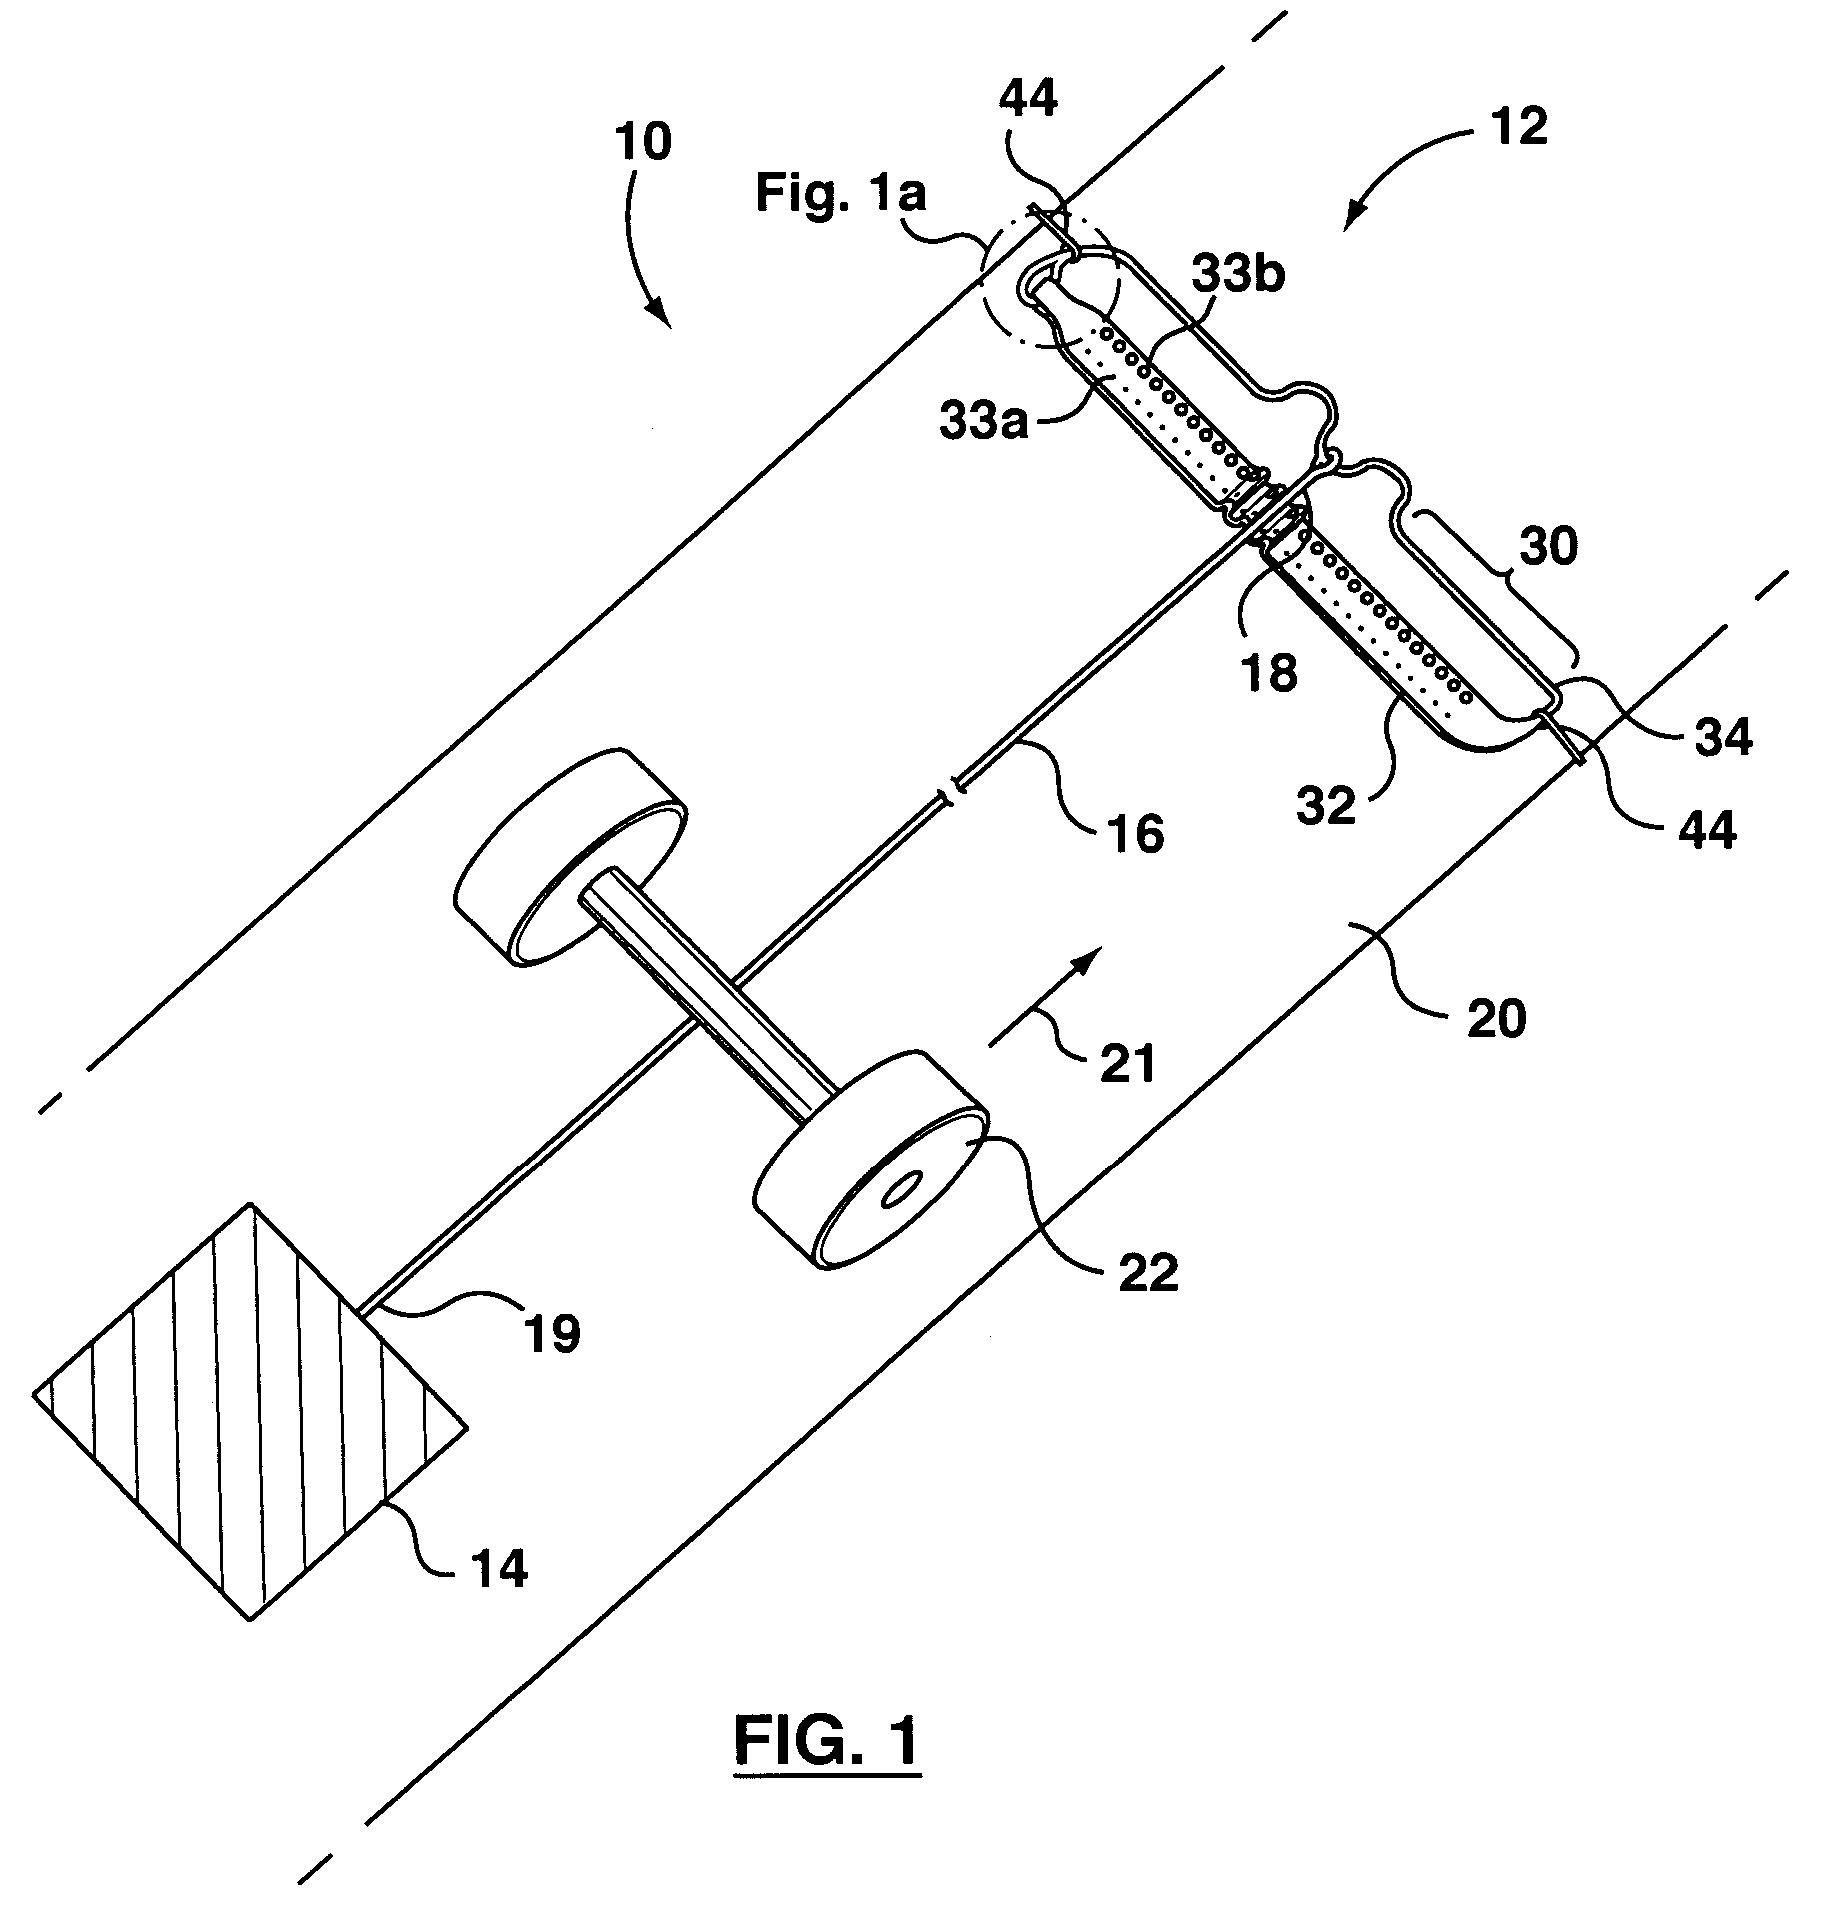 Vehicle stopping method and apparatus